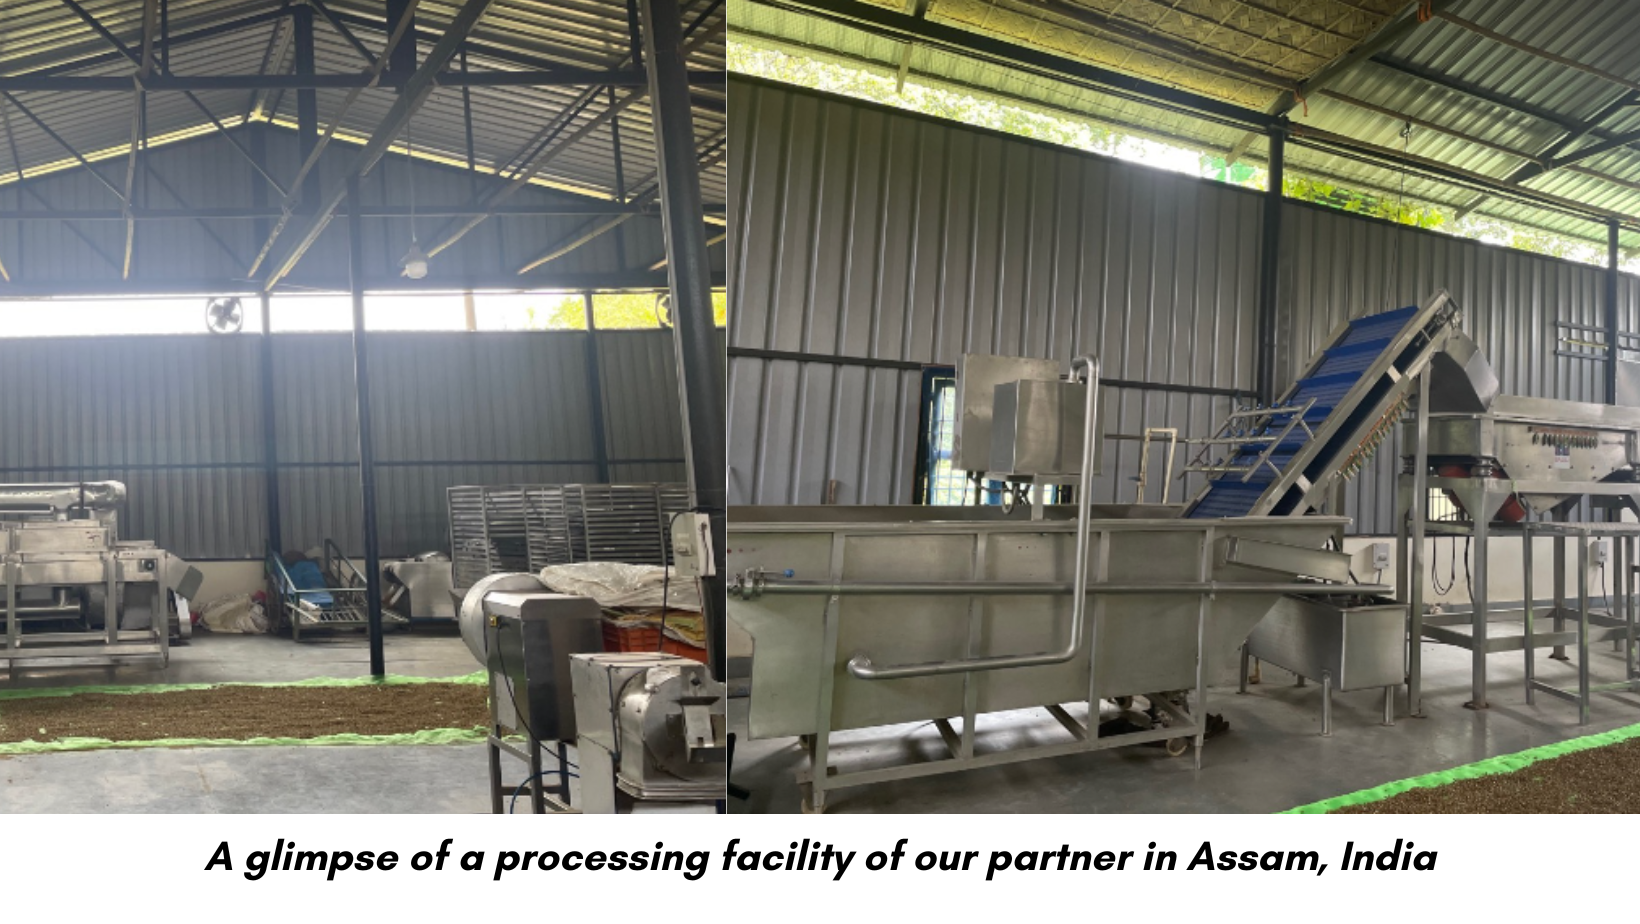 Processing facility in Assam